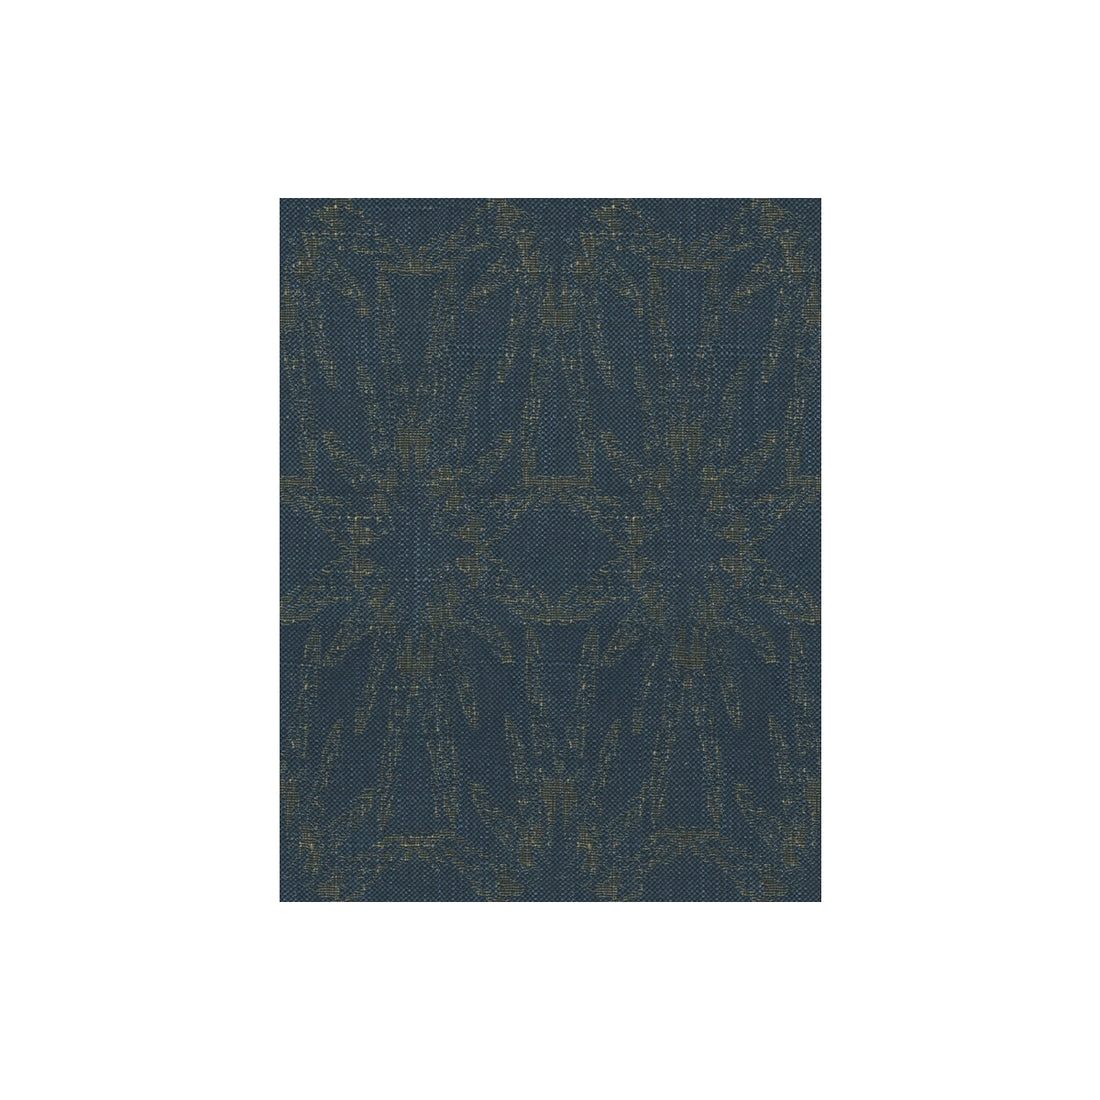 Starfish fabric in midnight color - pattern GWF-3202.50.0 - by Lee Jofa Modern in the Allegra Hicks Islands collection